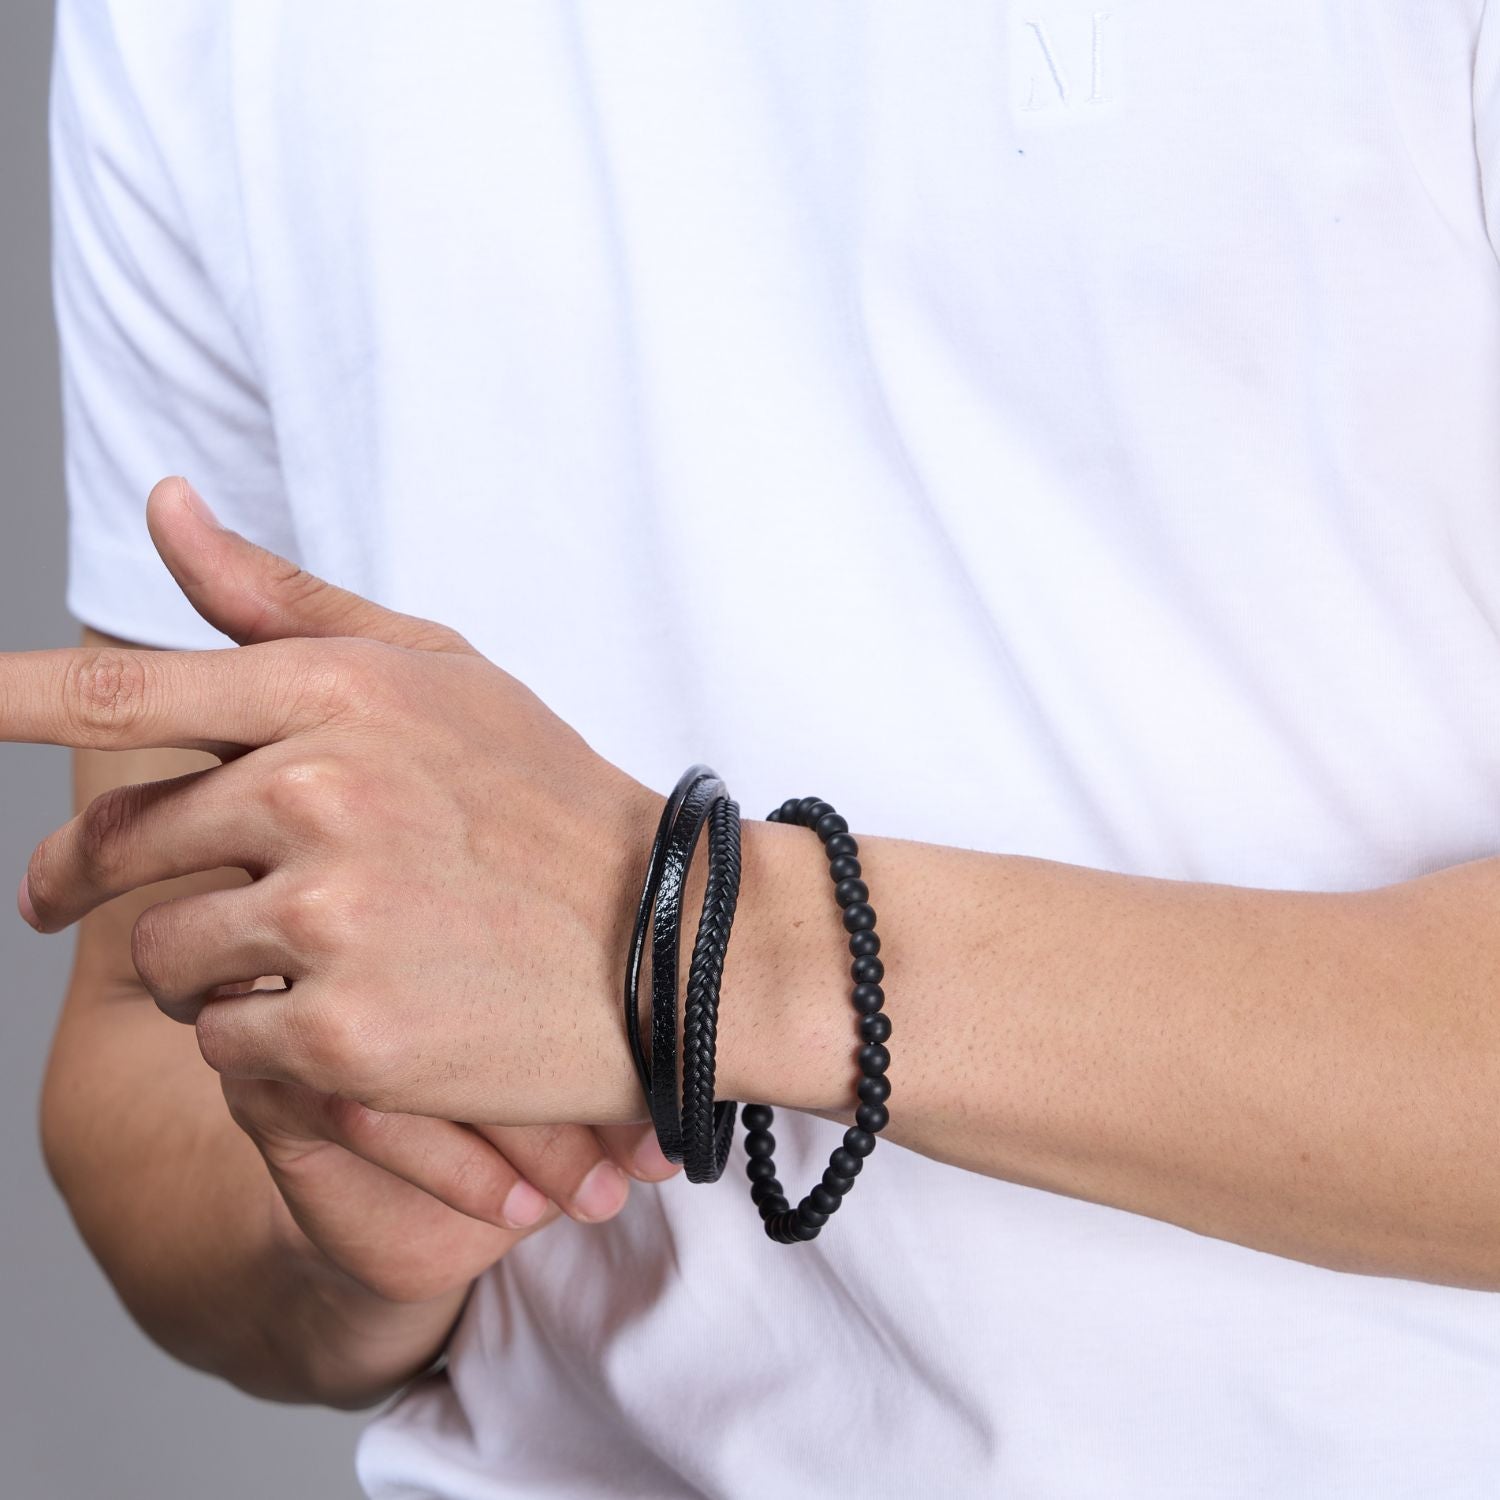 Black colored Multi-style Bracelet for men, with magnetic clasp, side view.